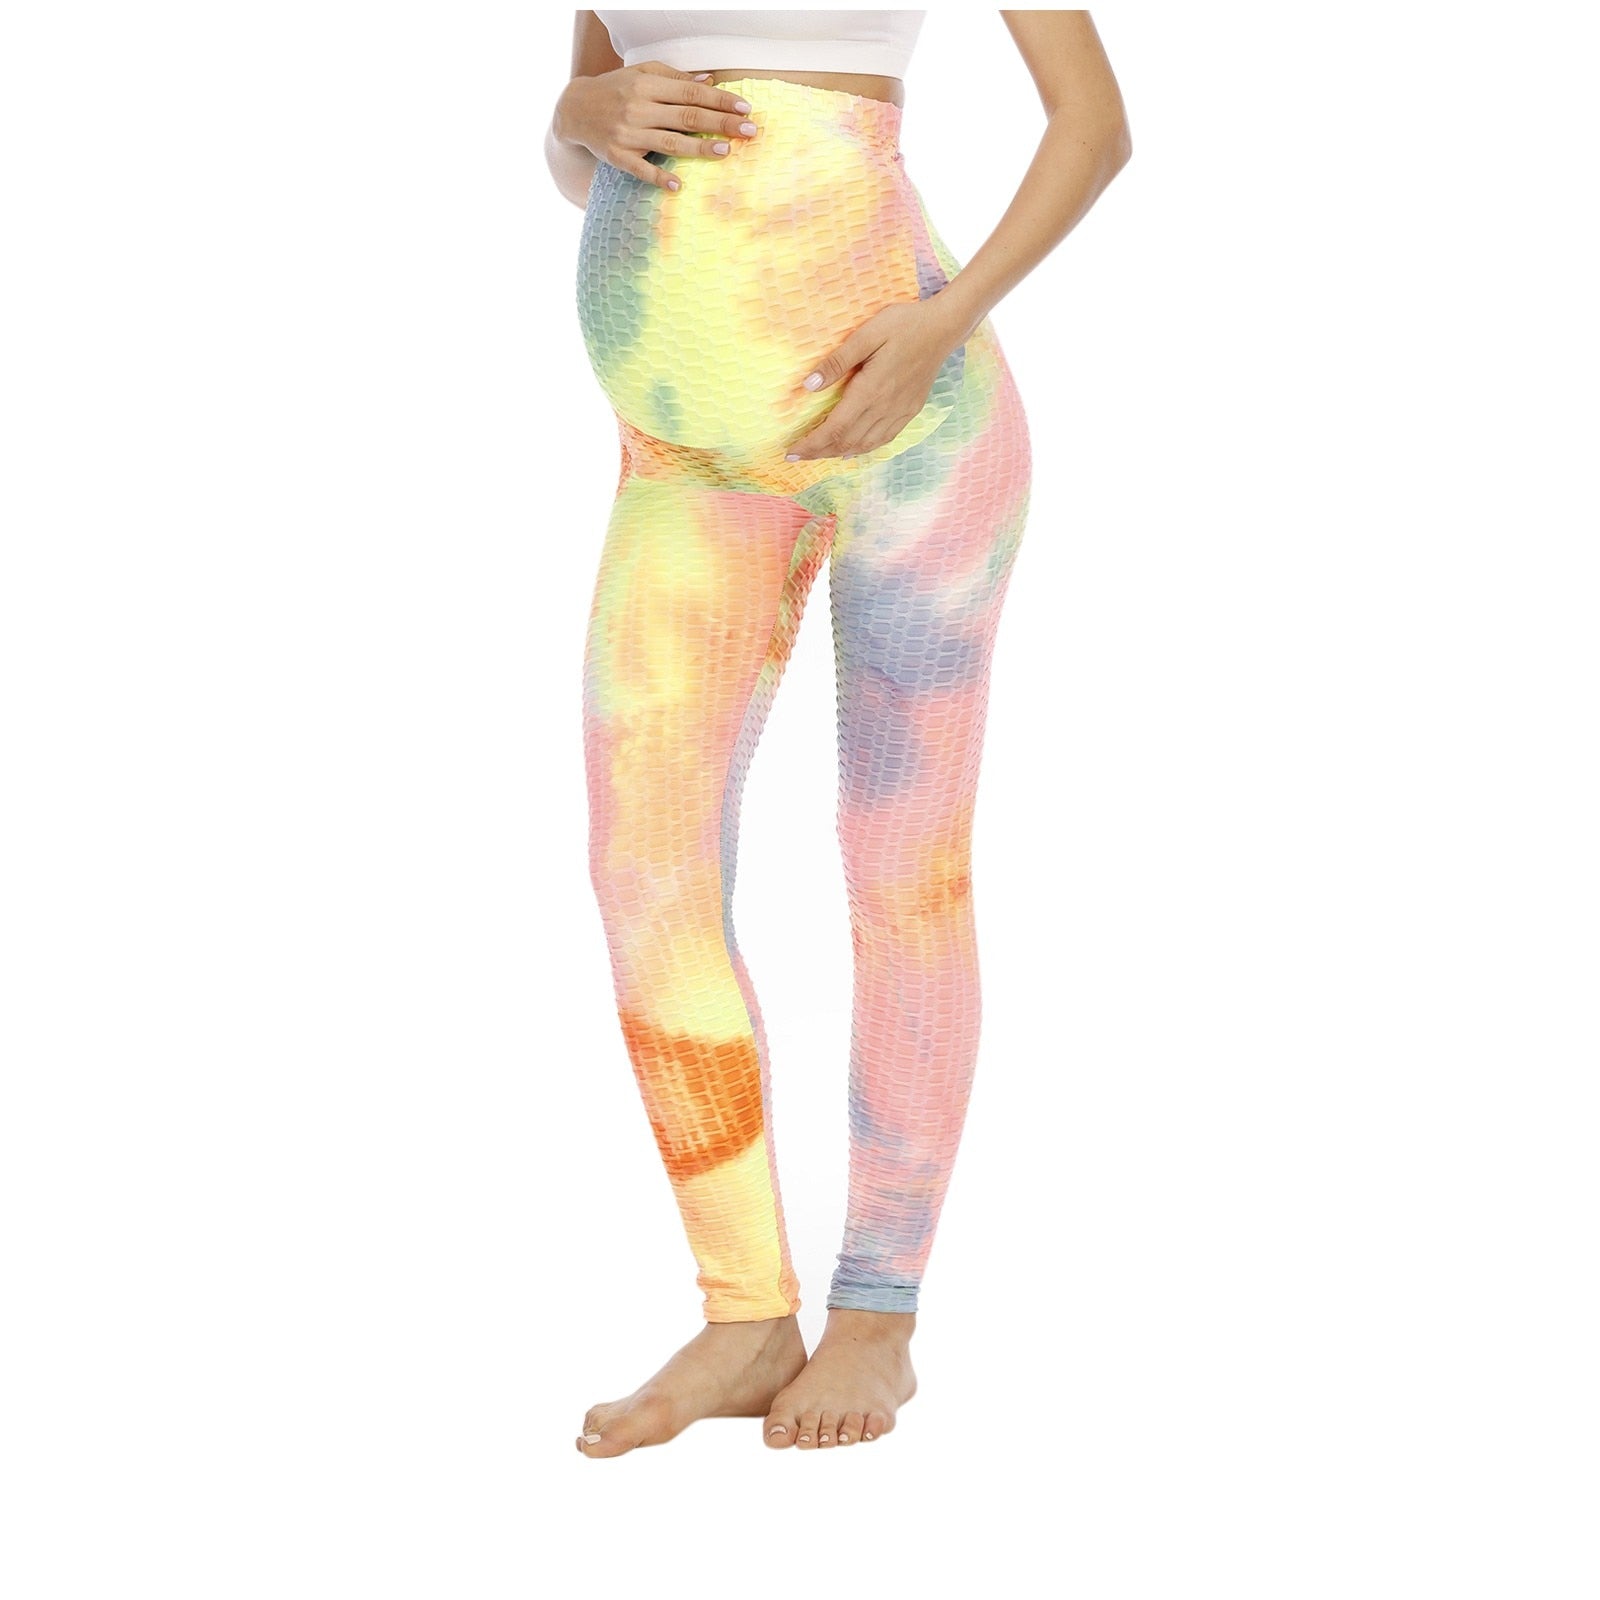 Pregnant Women Pants Maternity Tie-dyed Stretch Athletic Workout Yoga Full Length Pants